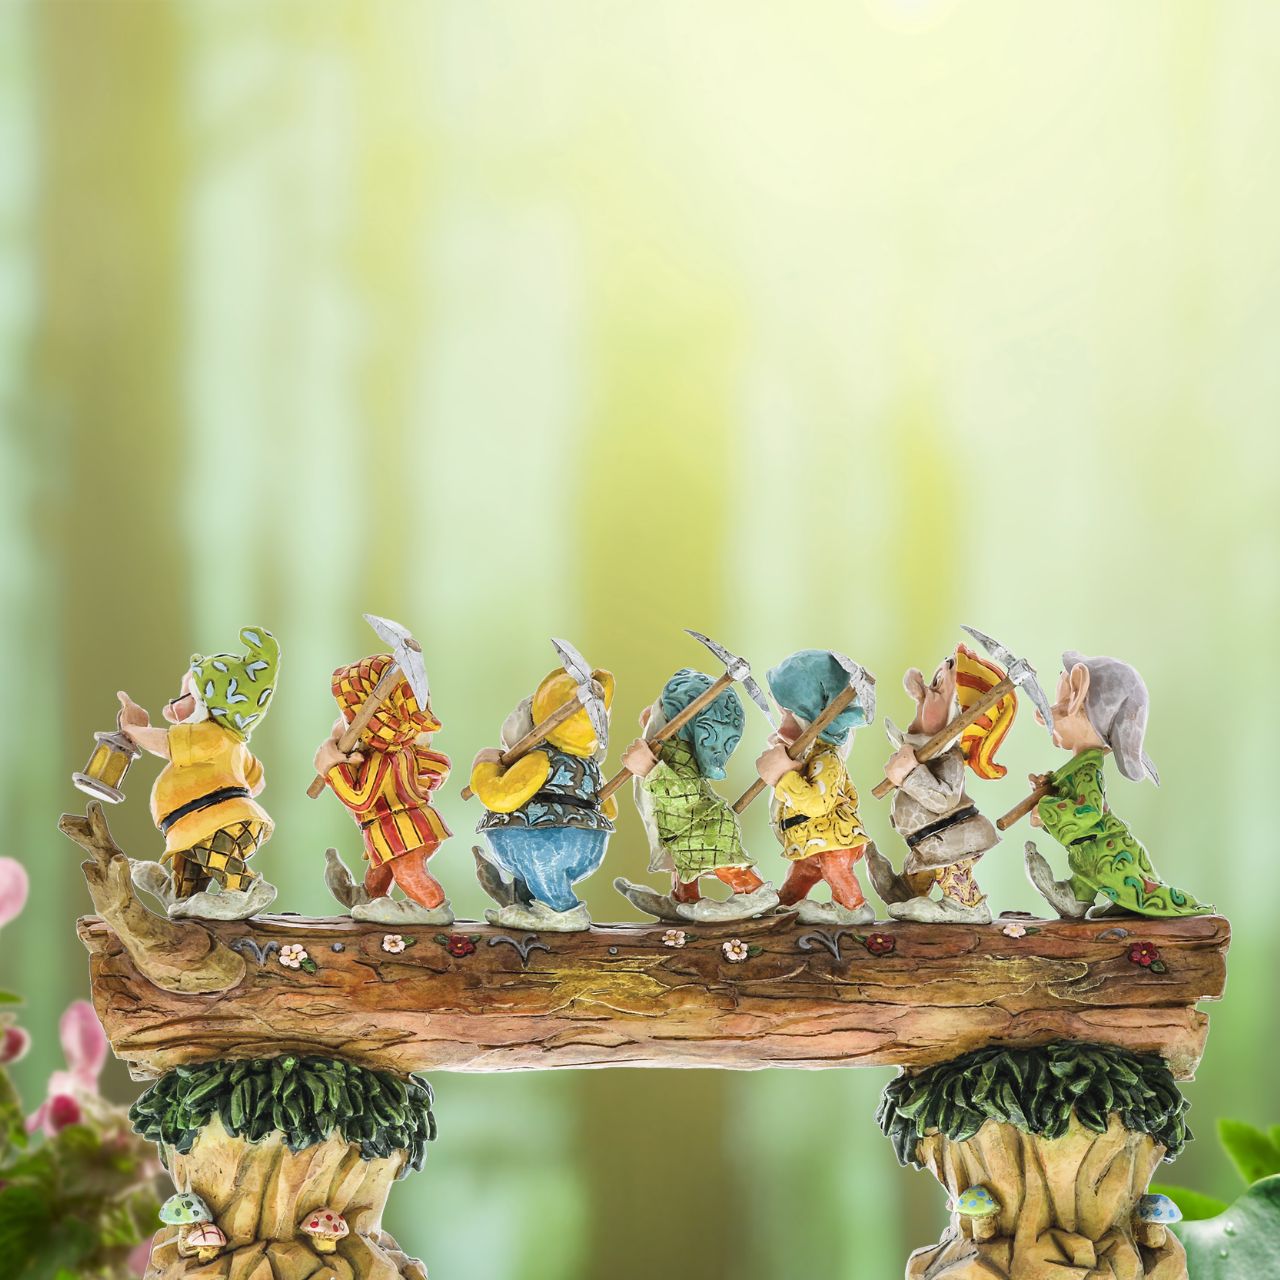 Homeward Bound captures a very memorable scene from the classic Snow White animation; the lovable 7 Dwarfs return home to find an unexpected house guest: a sleeping Princess. Designed by award winning artist and sculptor, Jim Shore for the Disney Traditions brand.